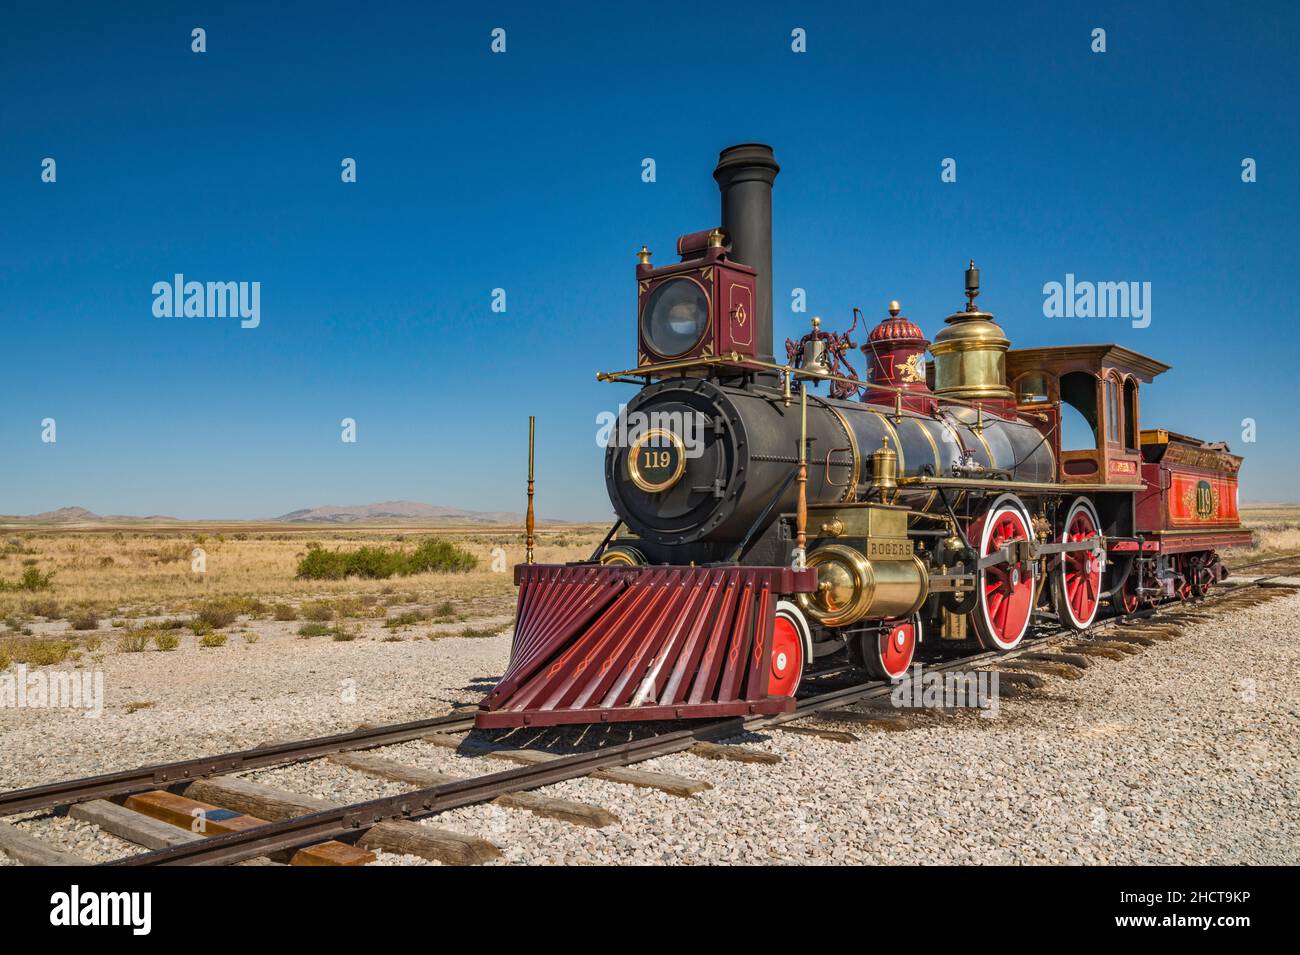 No 119 steam engine locomotive replica, cowcatcher in front, at Last Spike Site at Promontory Summit, Golden Spike National Historical Park, Utah, USA Stock Photo